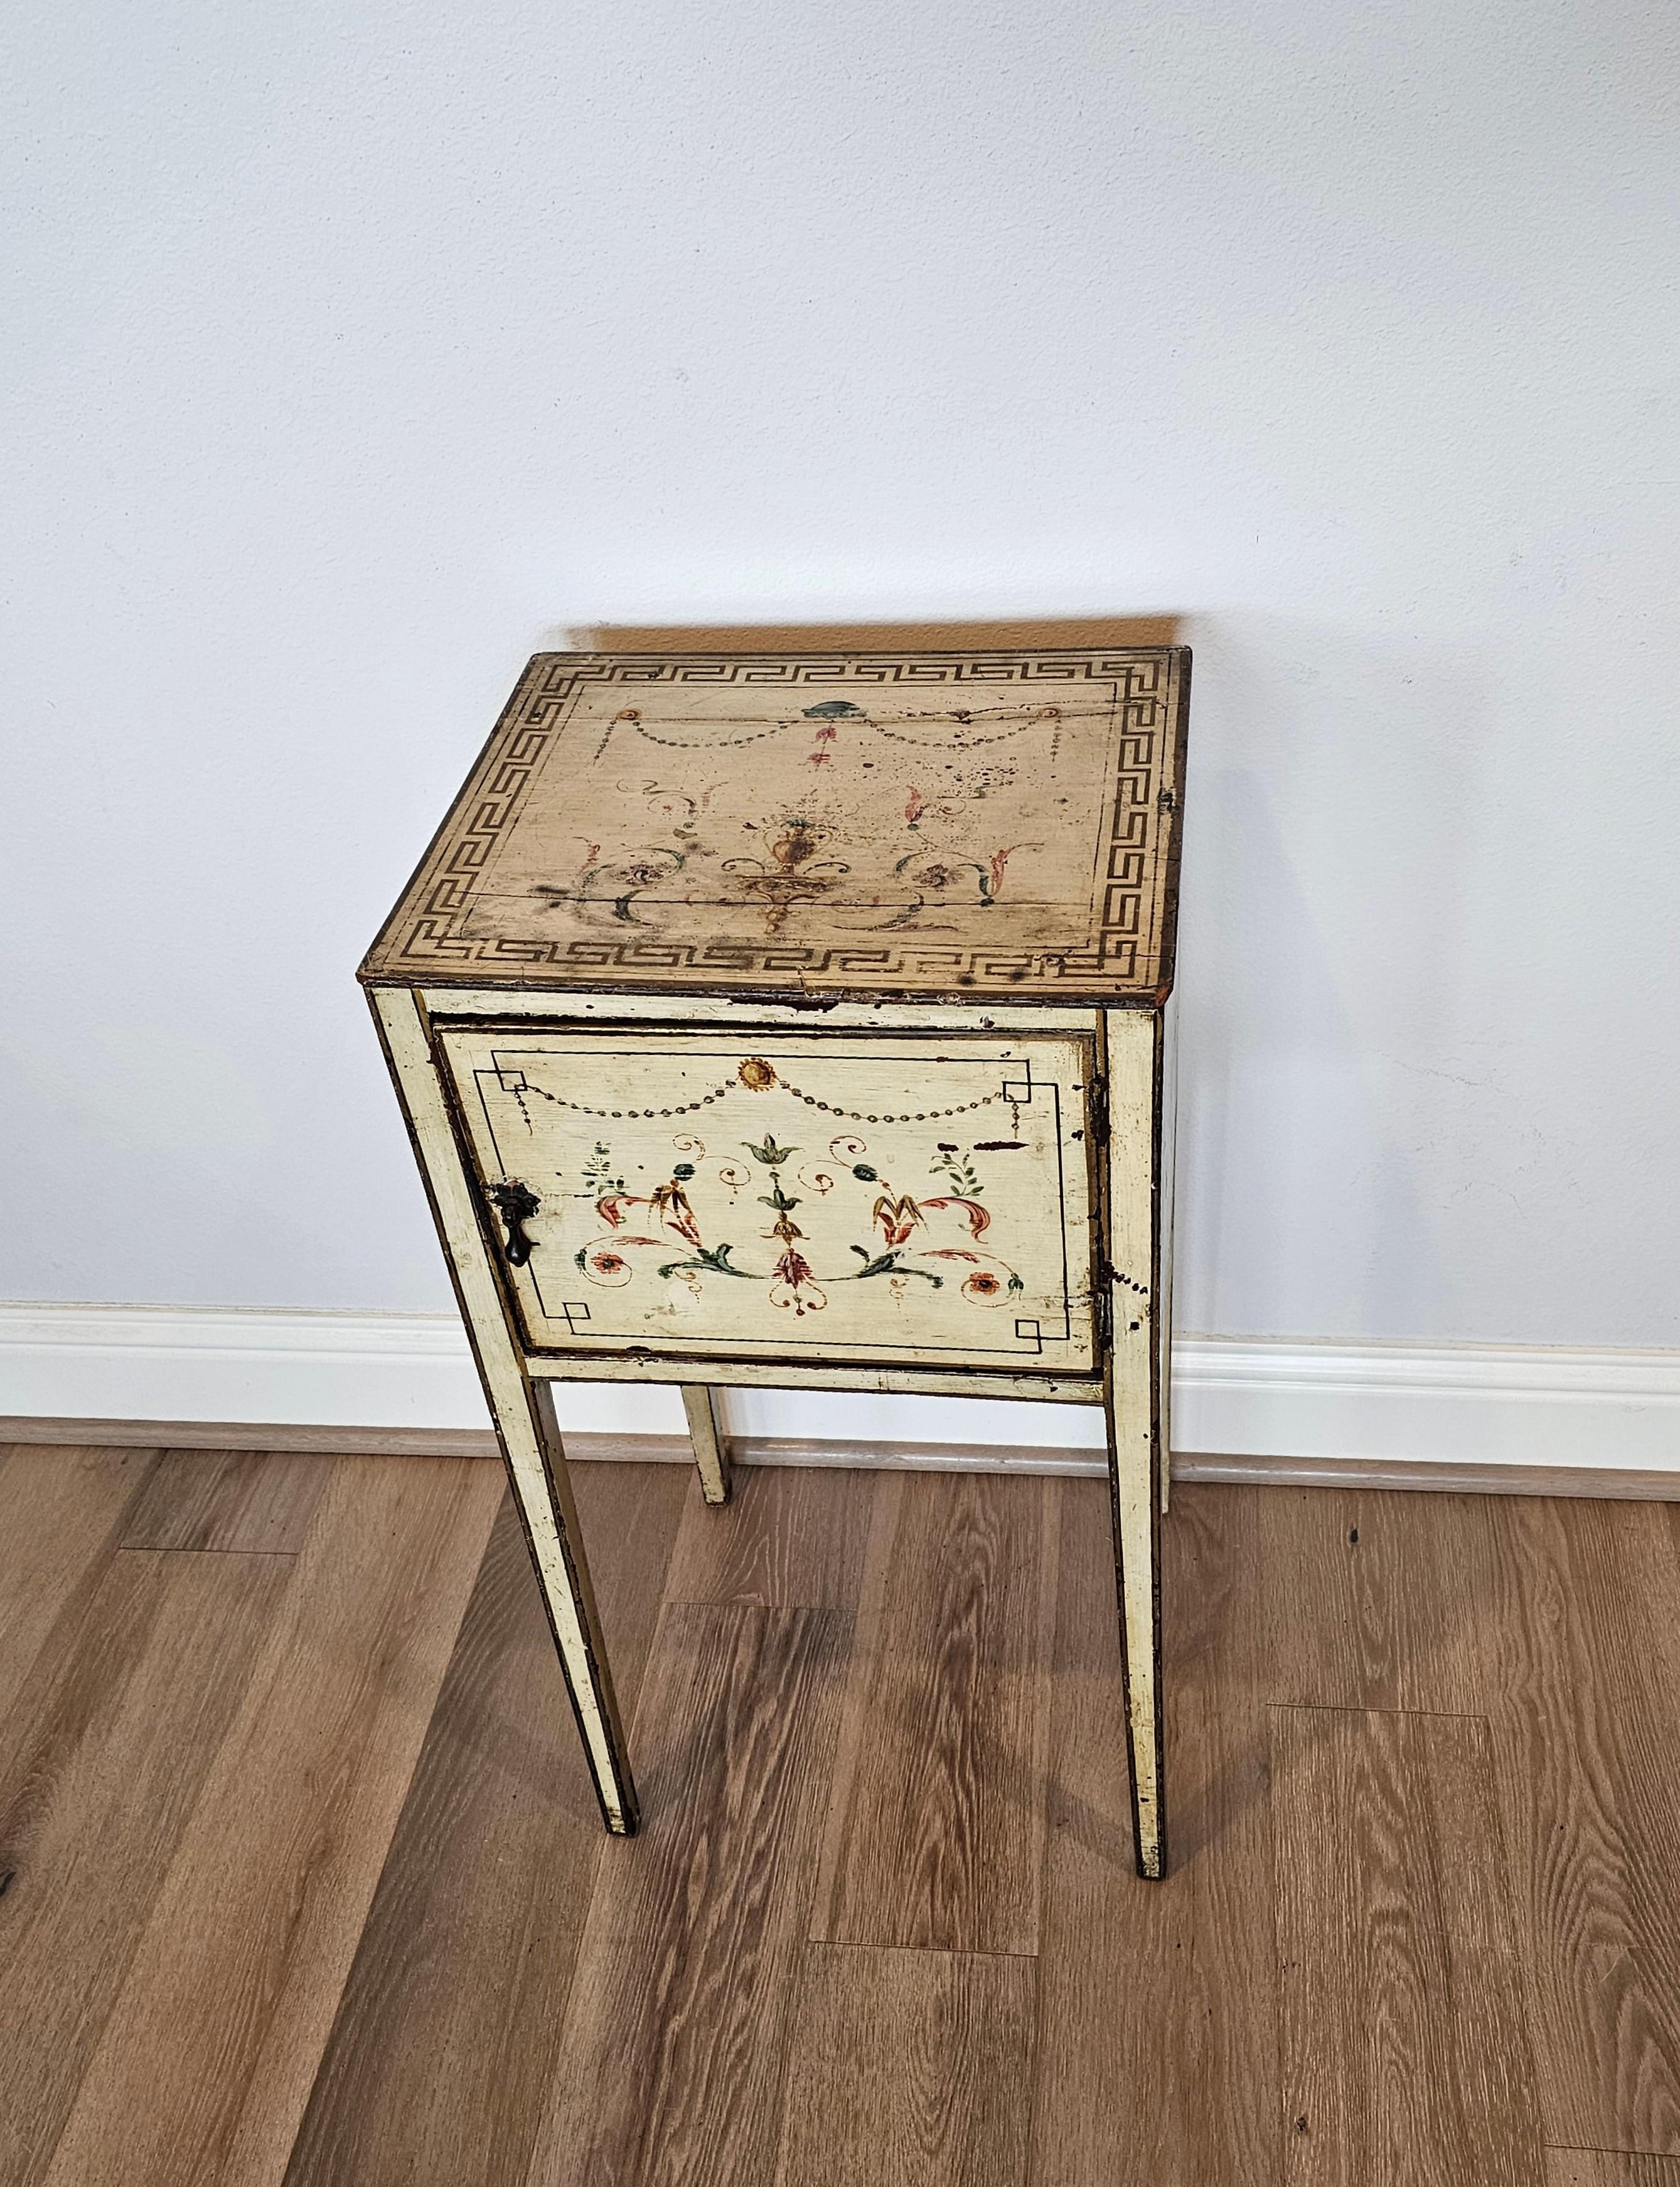 Neoclassical 19th Century Italian Neo-classical Revival Hand-Painted Nightstand Table For Sale